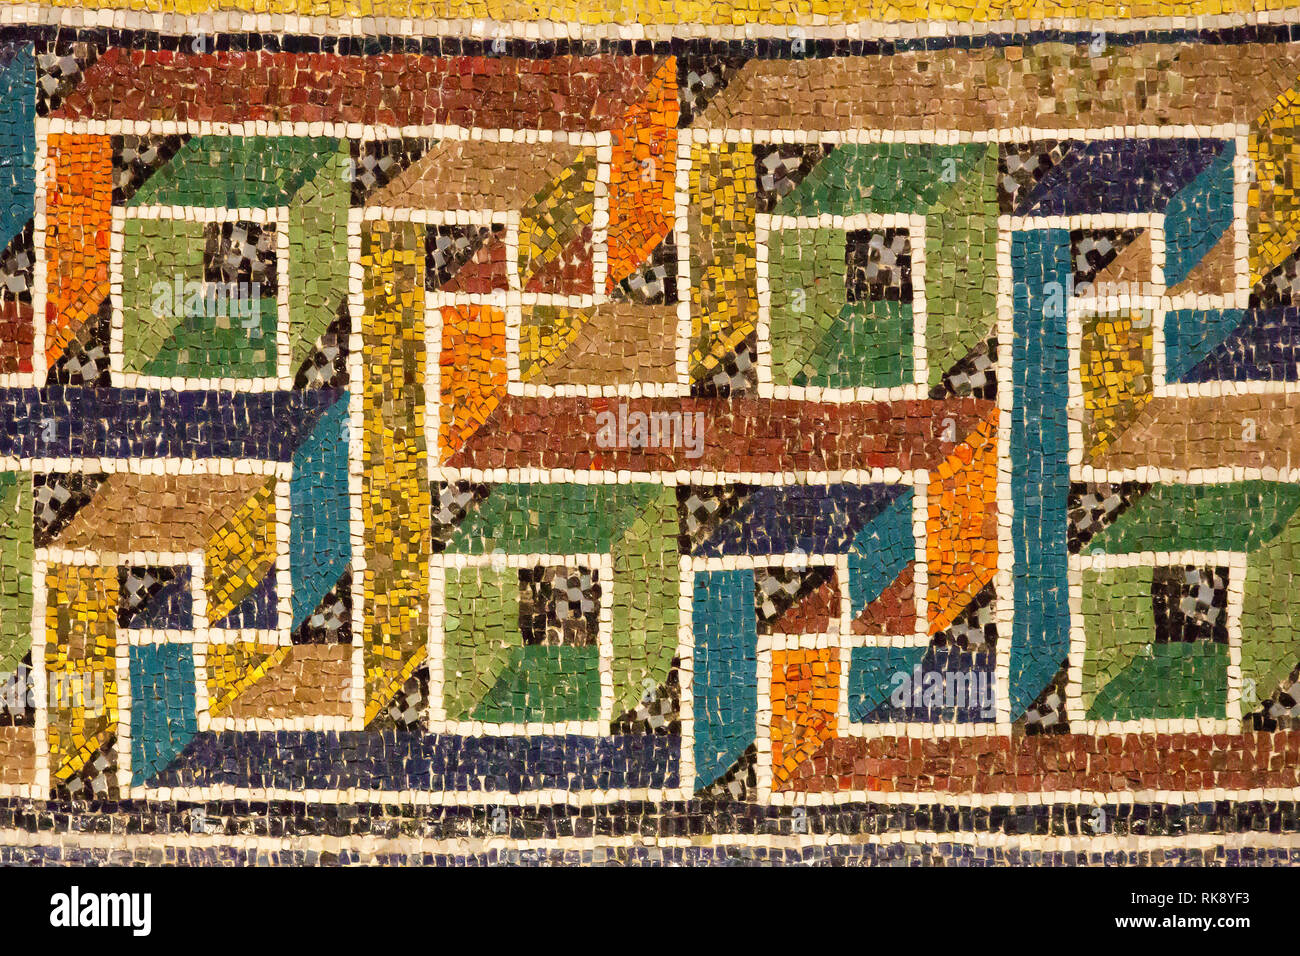 Very colorful byzantine mosaic in Mausoleum of Galla Placidia, Ravenna, Italy. An ancient ornamental mosaic, astonishing for its incredible modernity. Stock Photo